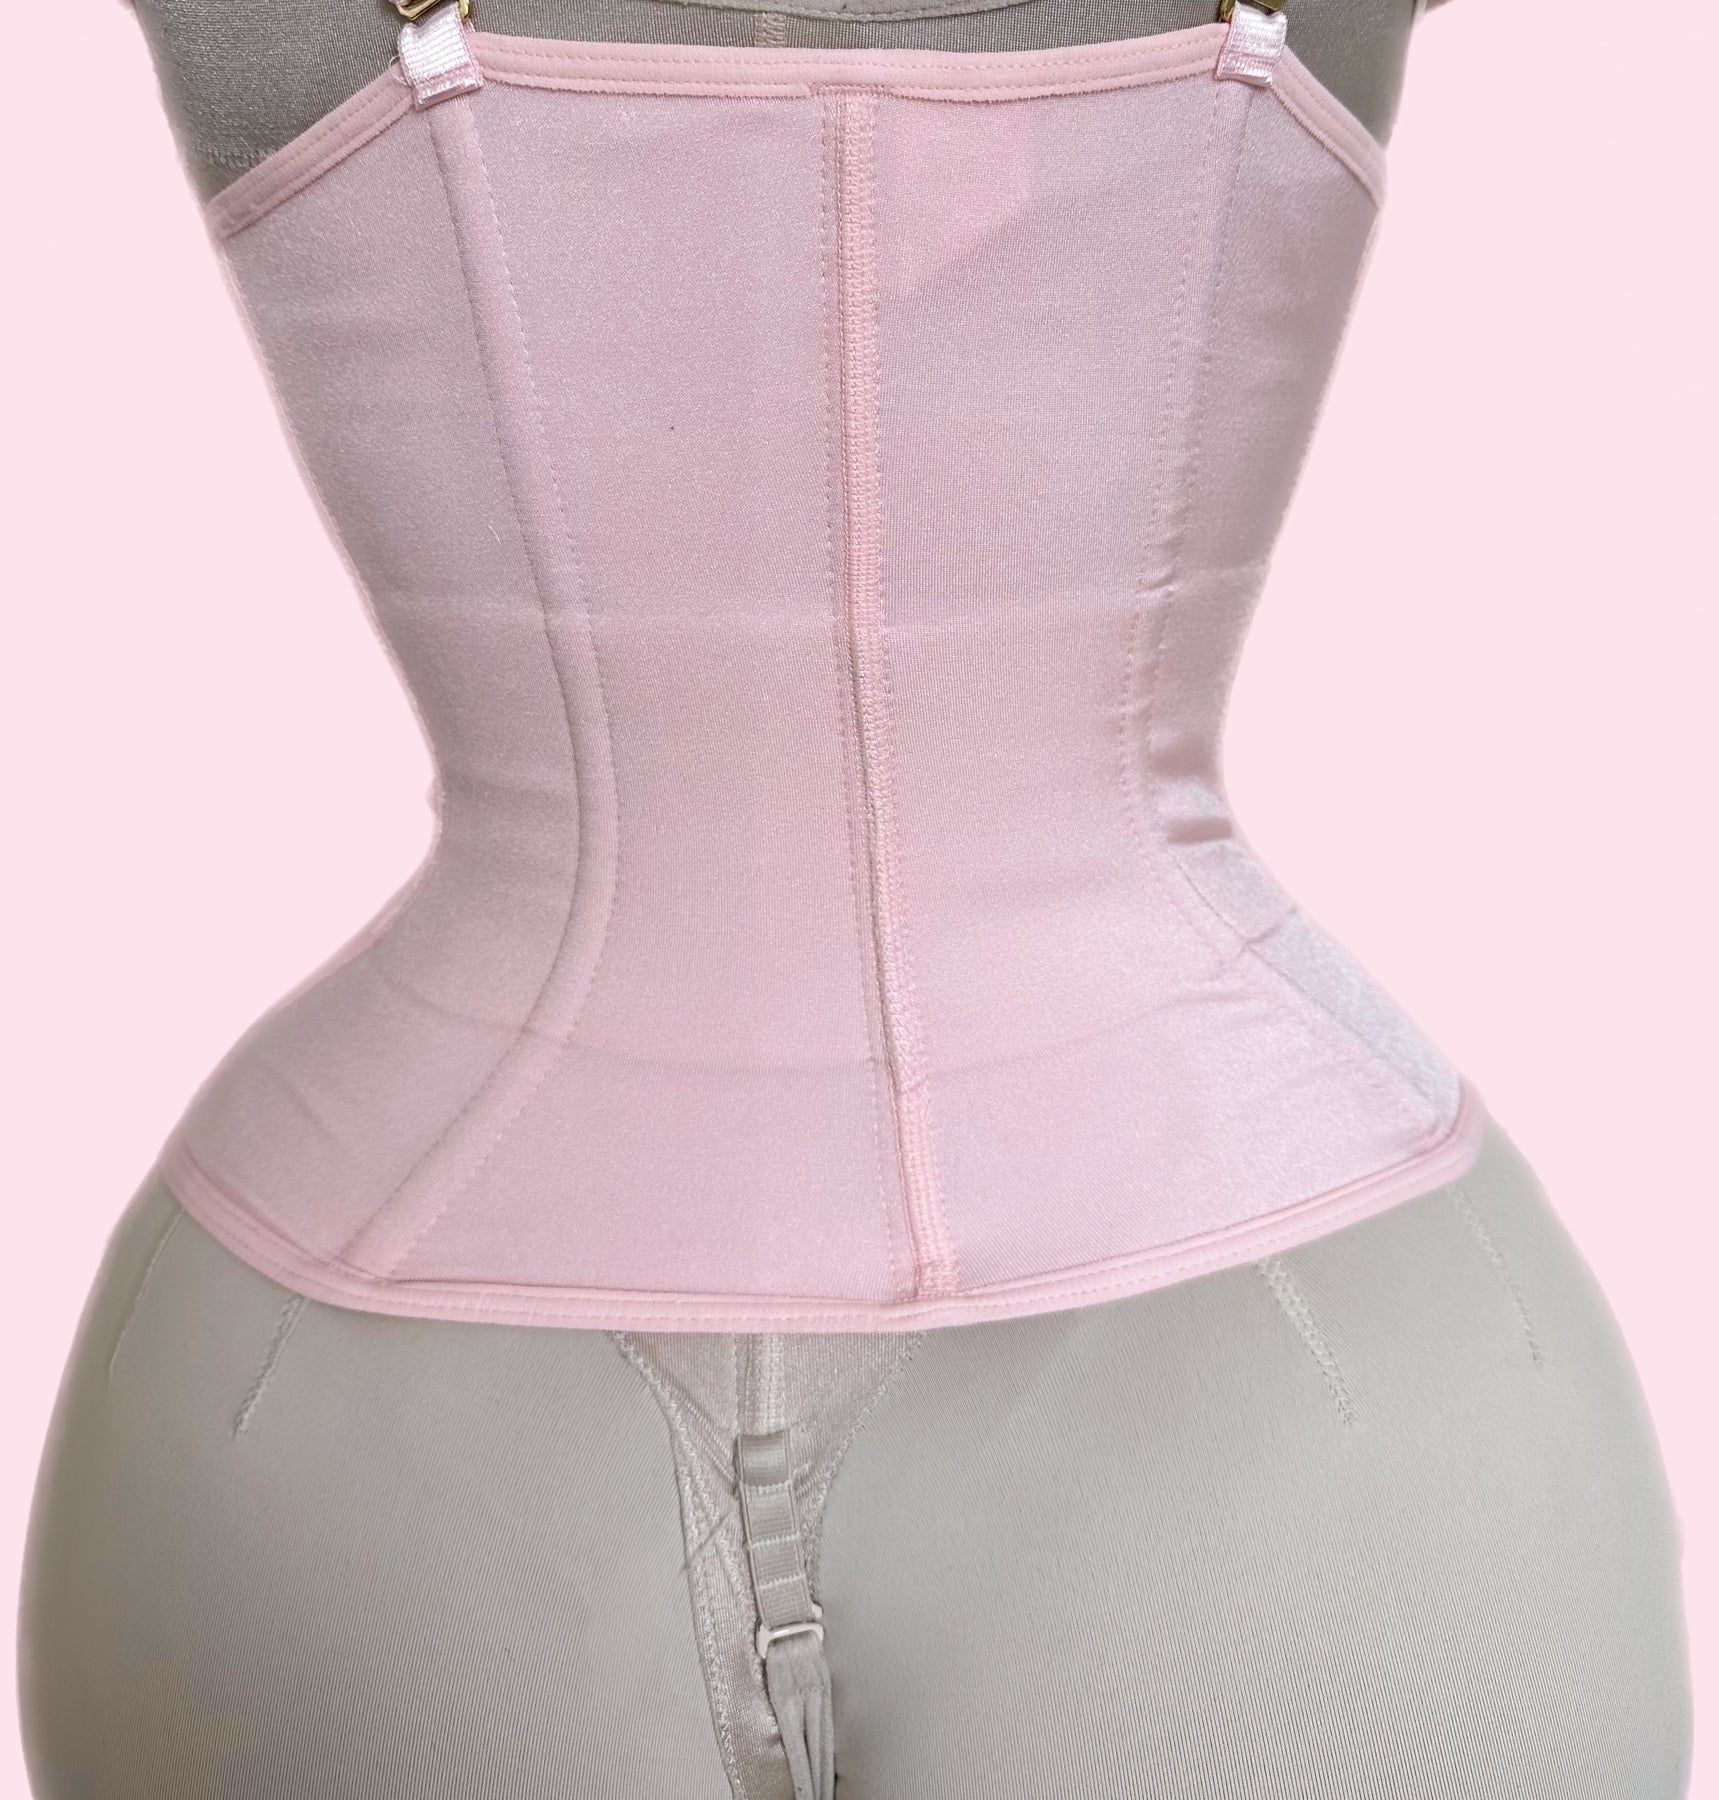 Premium colombian corset/Waist trainer - PINK – Fit Doll Collection